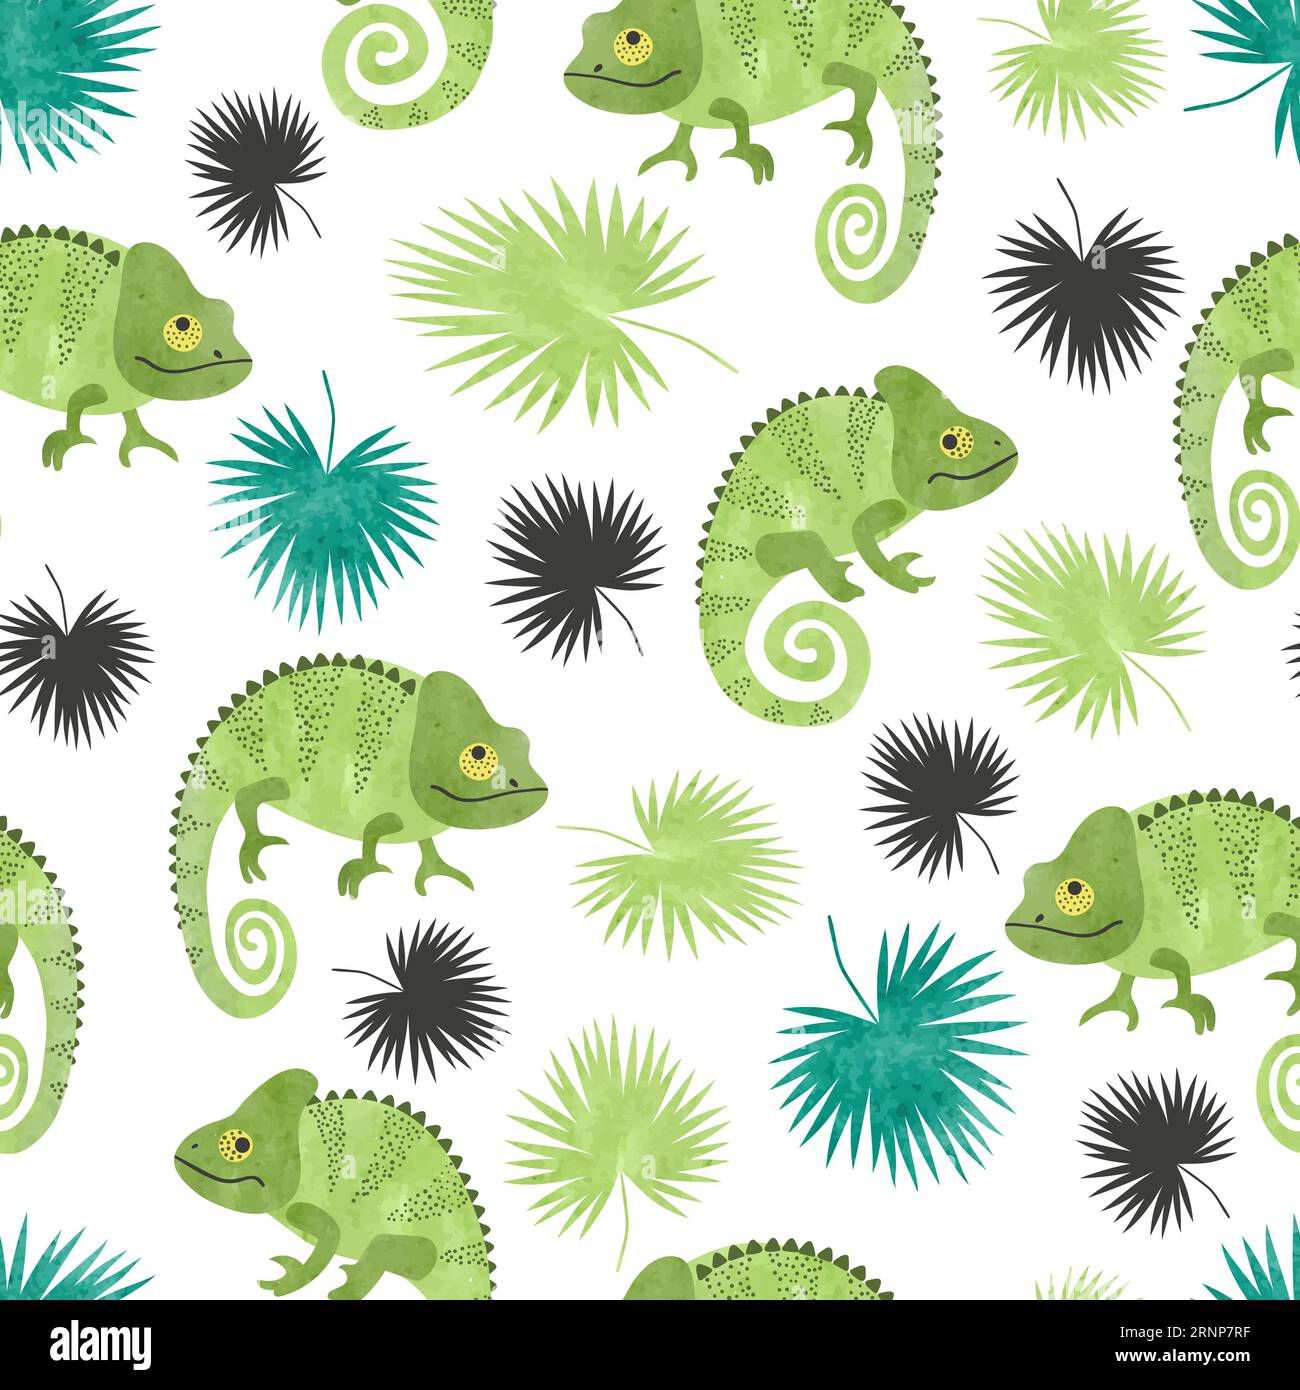 Seamless tropical pattern with green watercolor chameleons and palm leaves. Stock Vector